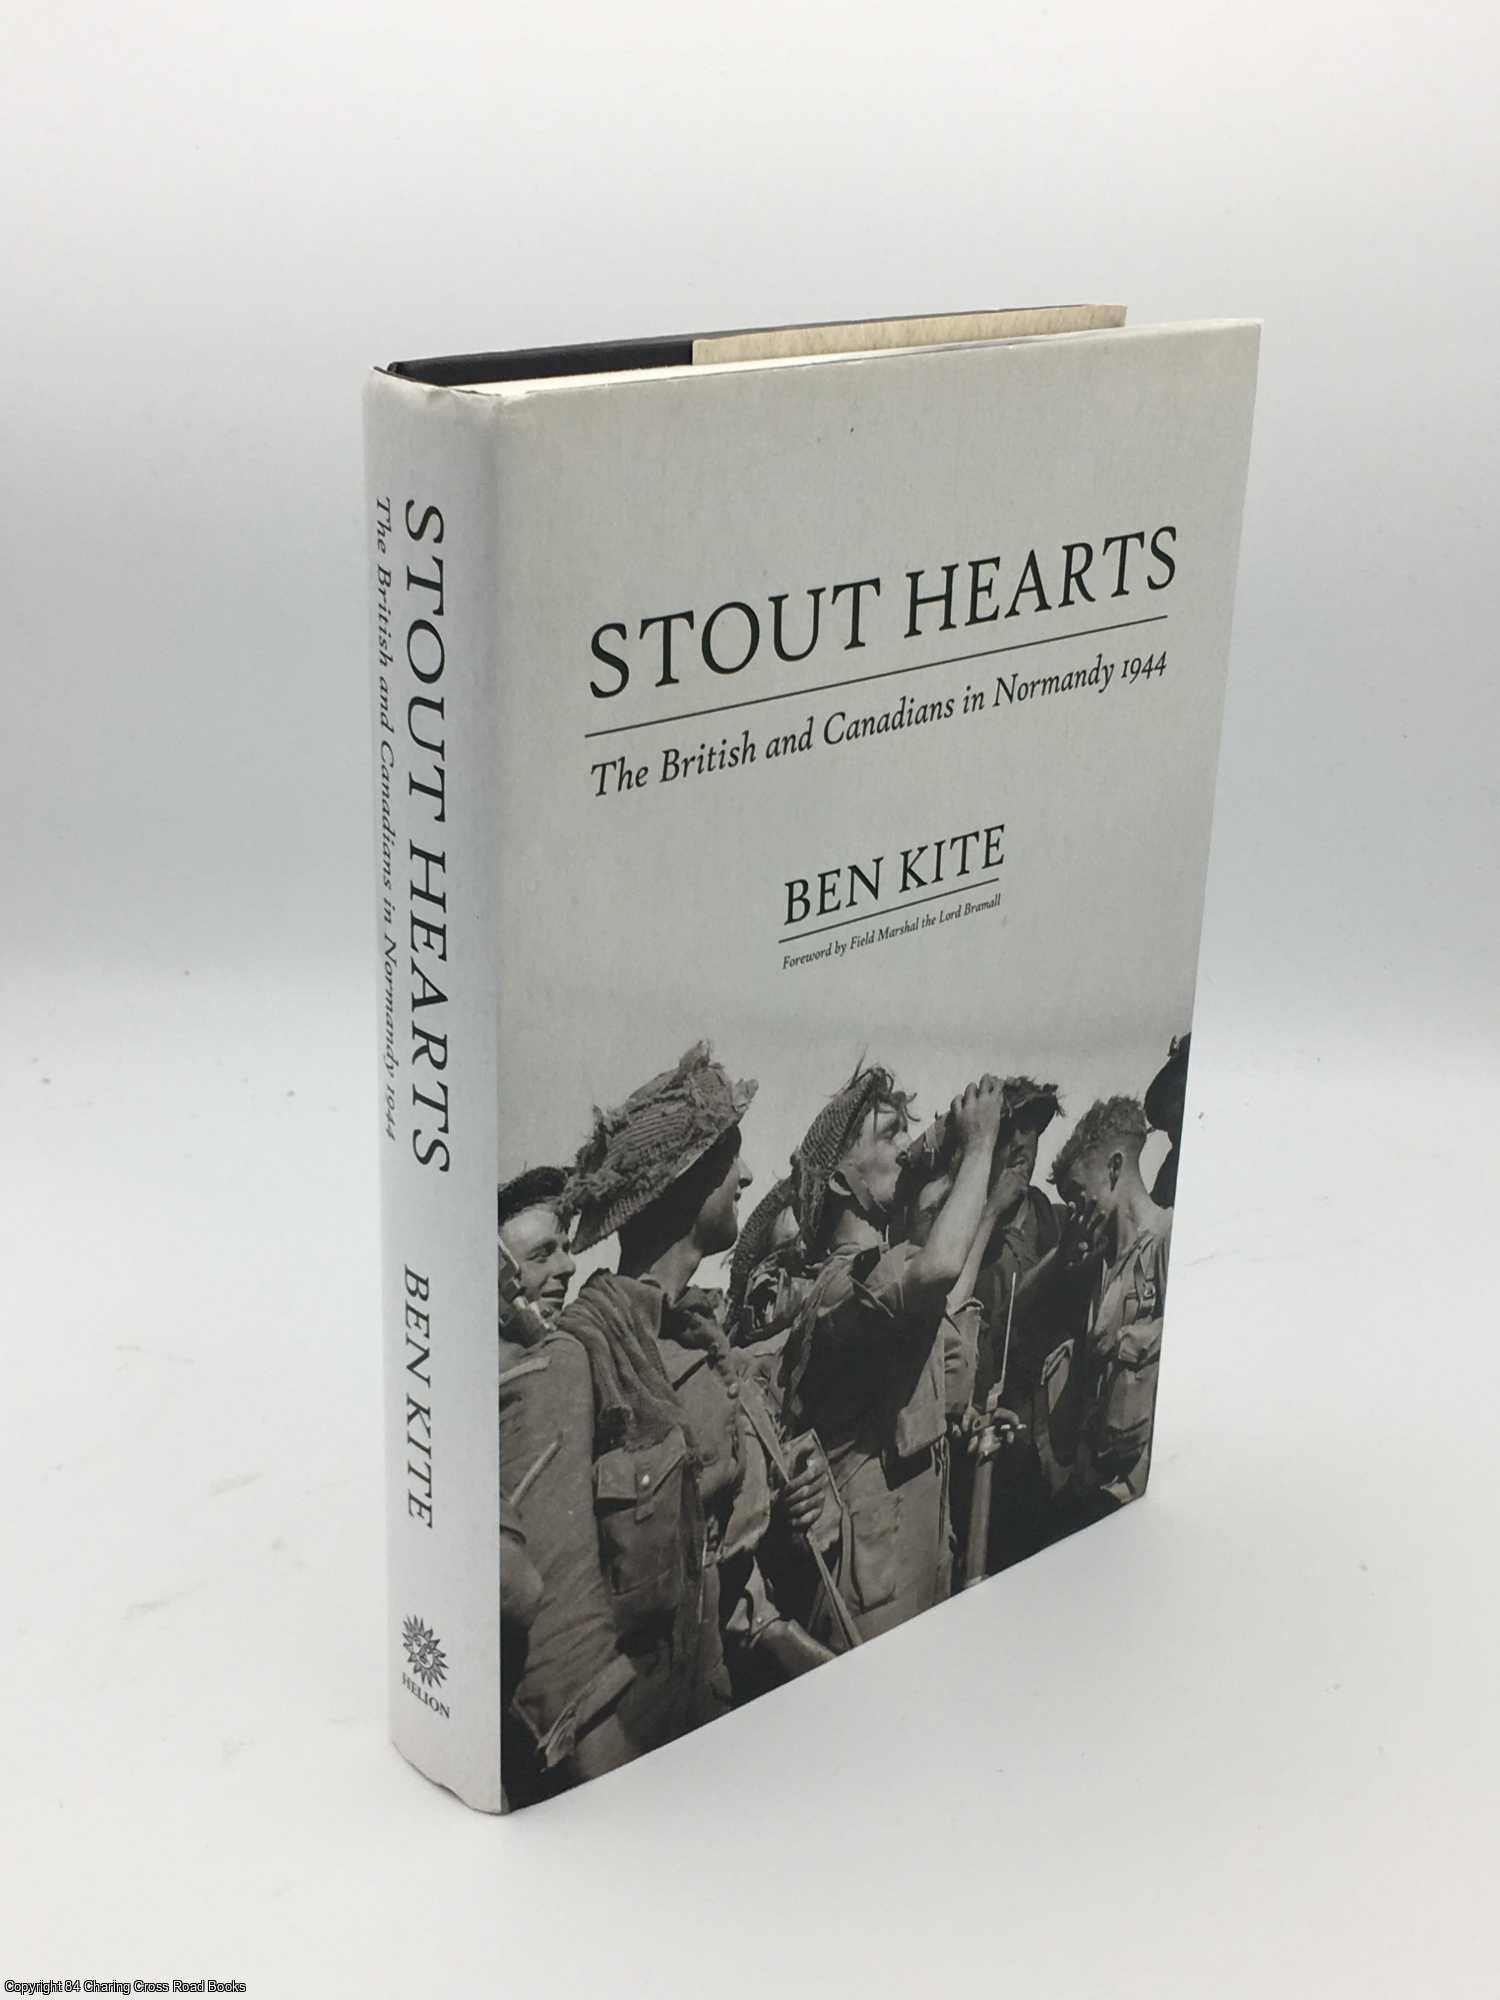 Kite, Ben - Stout Hearts: The British and Canadians in Normandy 1944